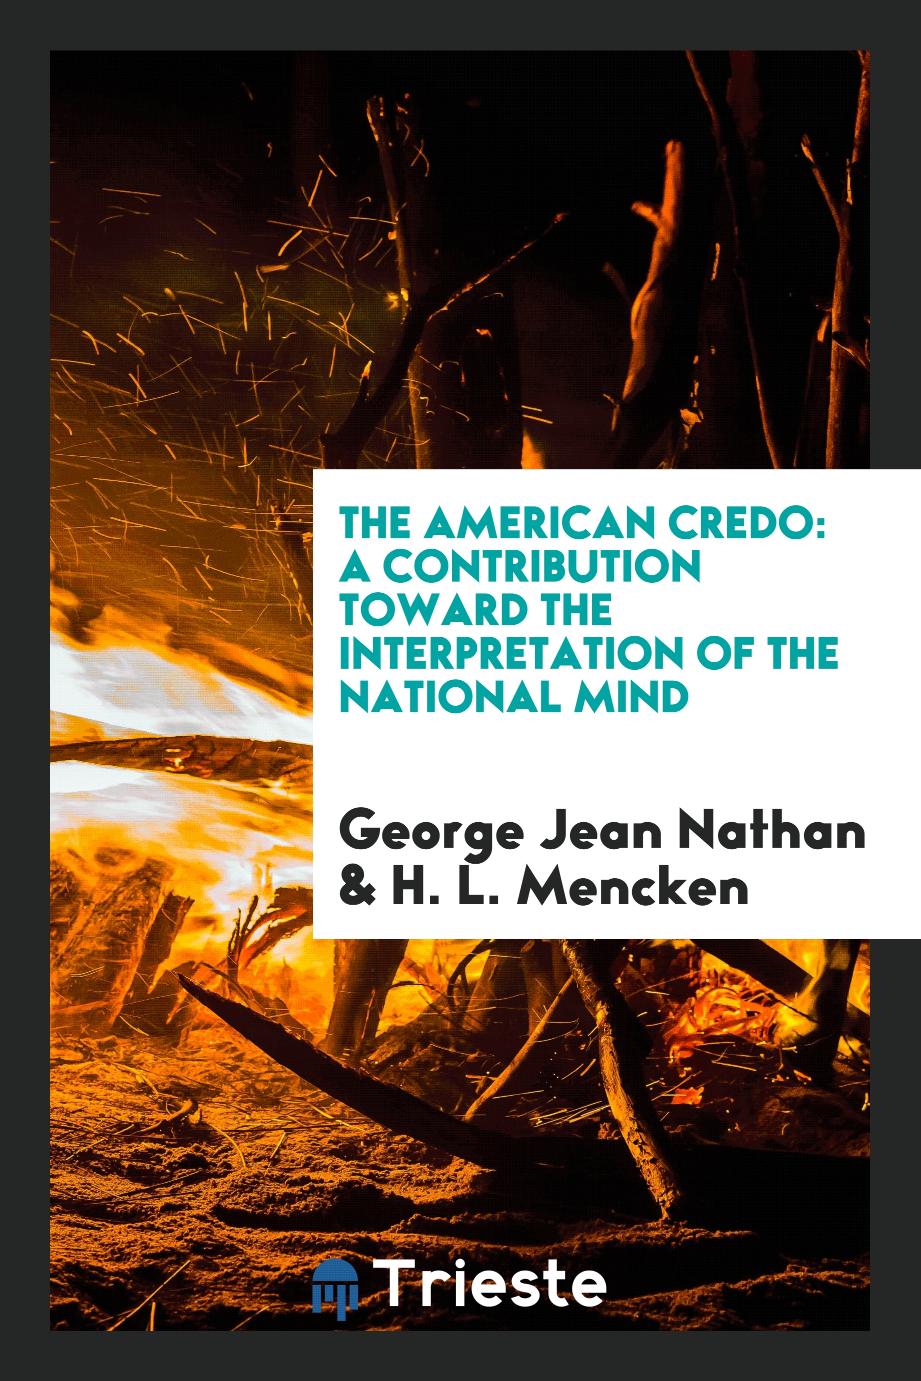 The American Credo: A Contribution toward the Interpretation of the National Mind